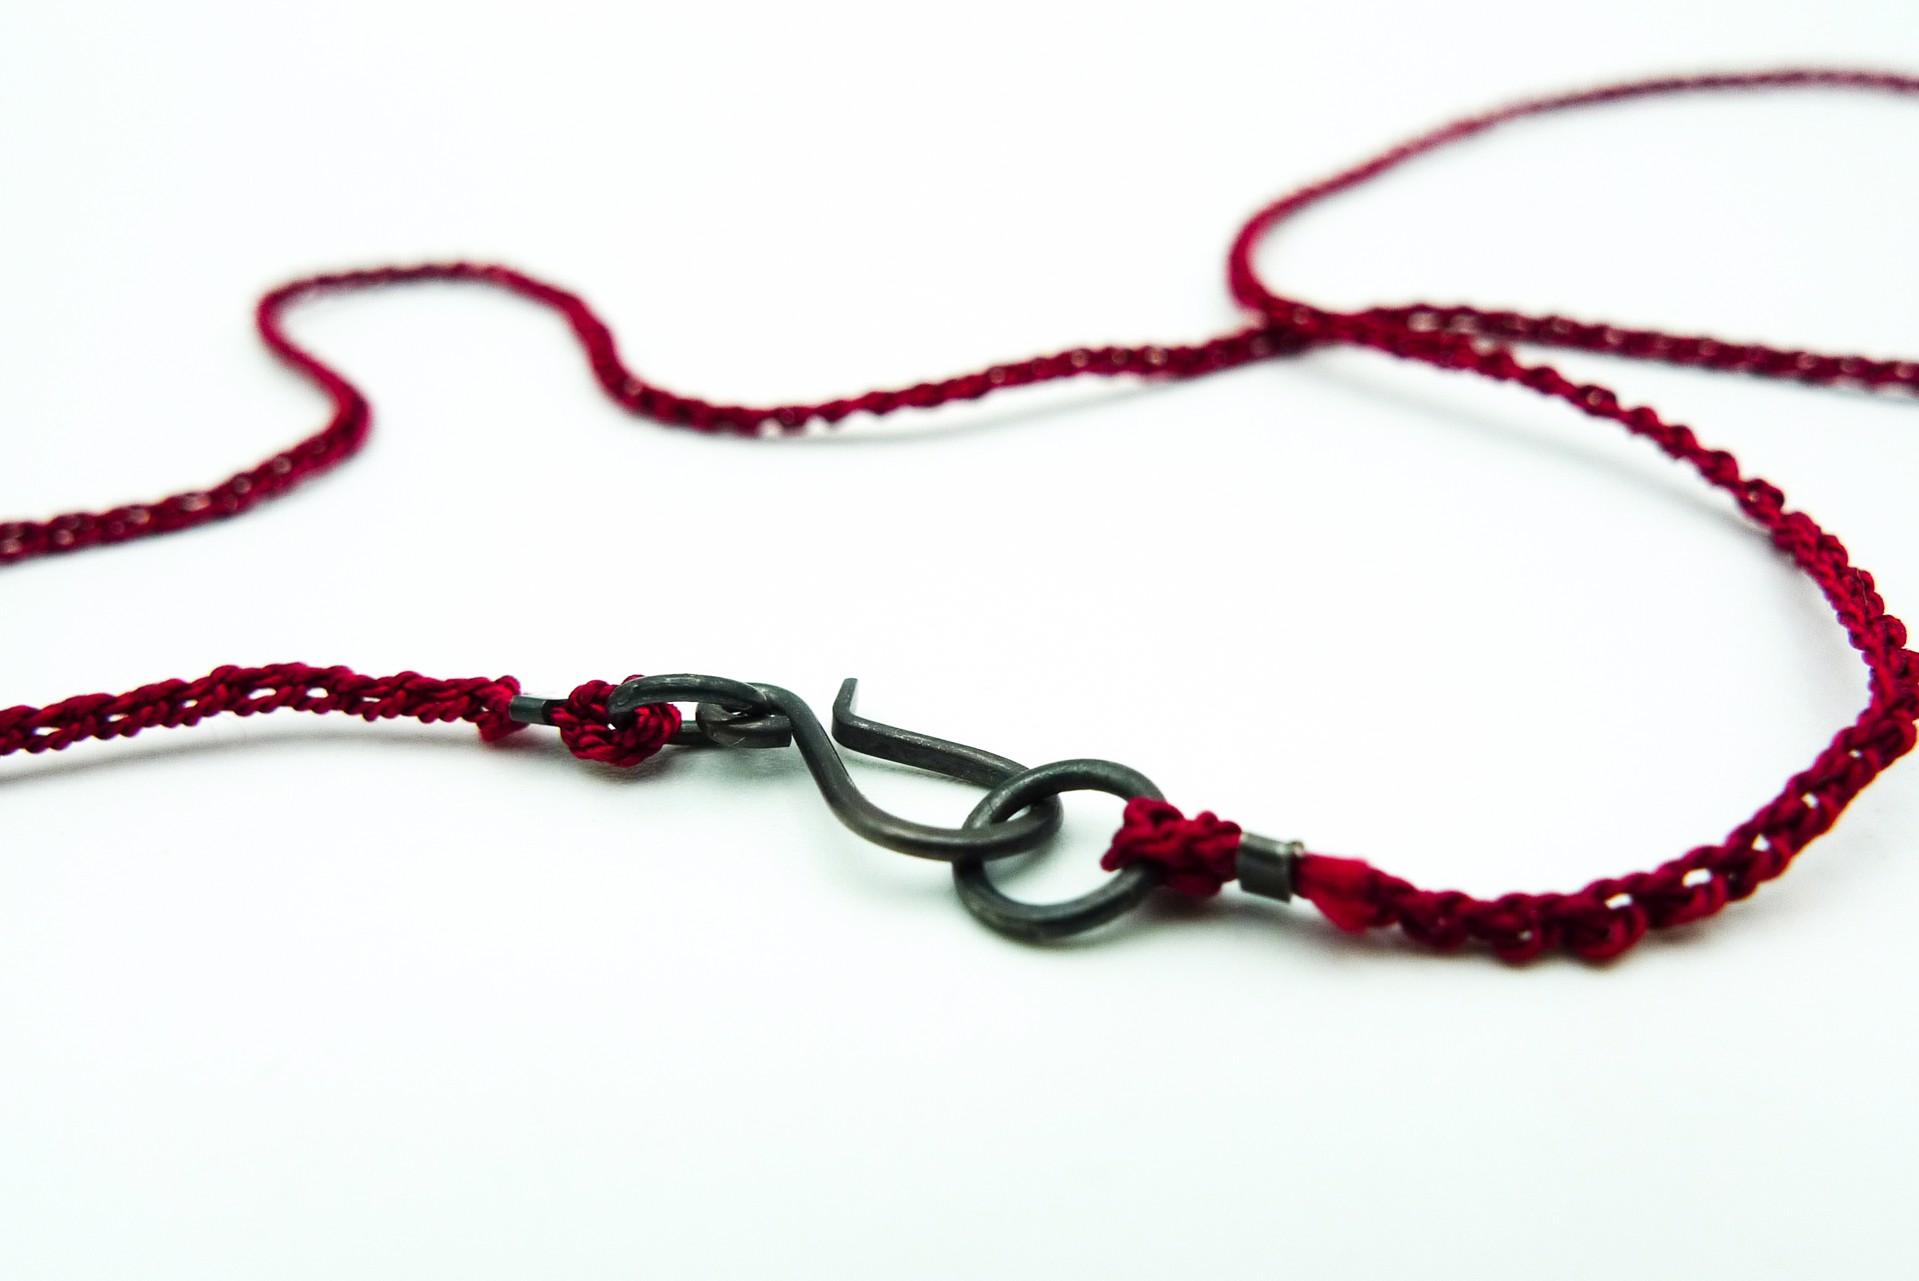 Necklace with Red Silk Thread by Erica Schlueter